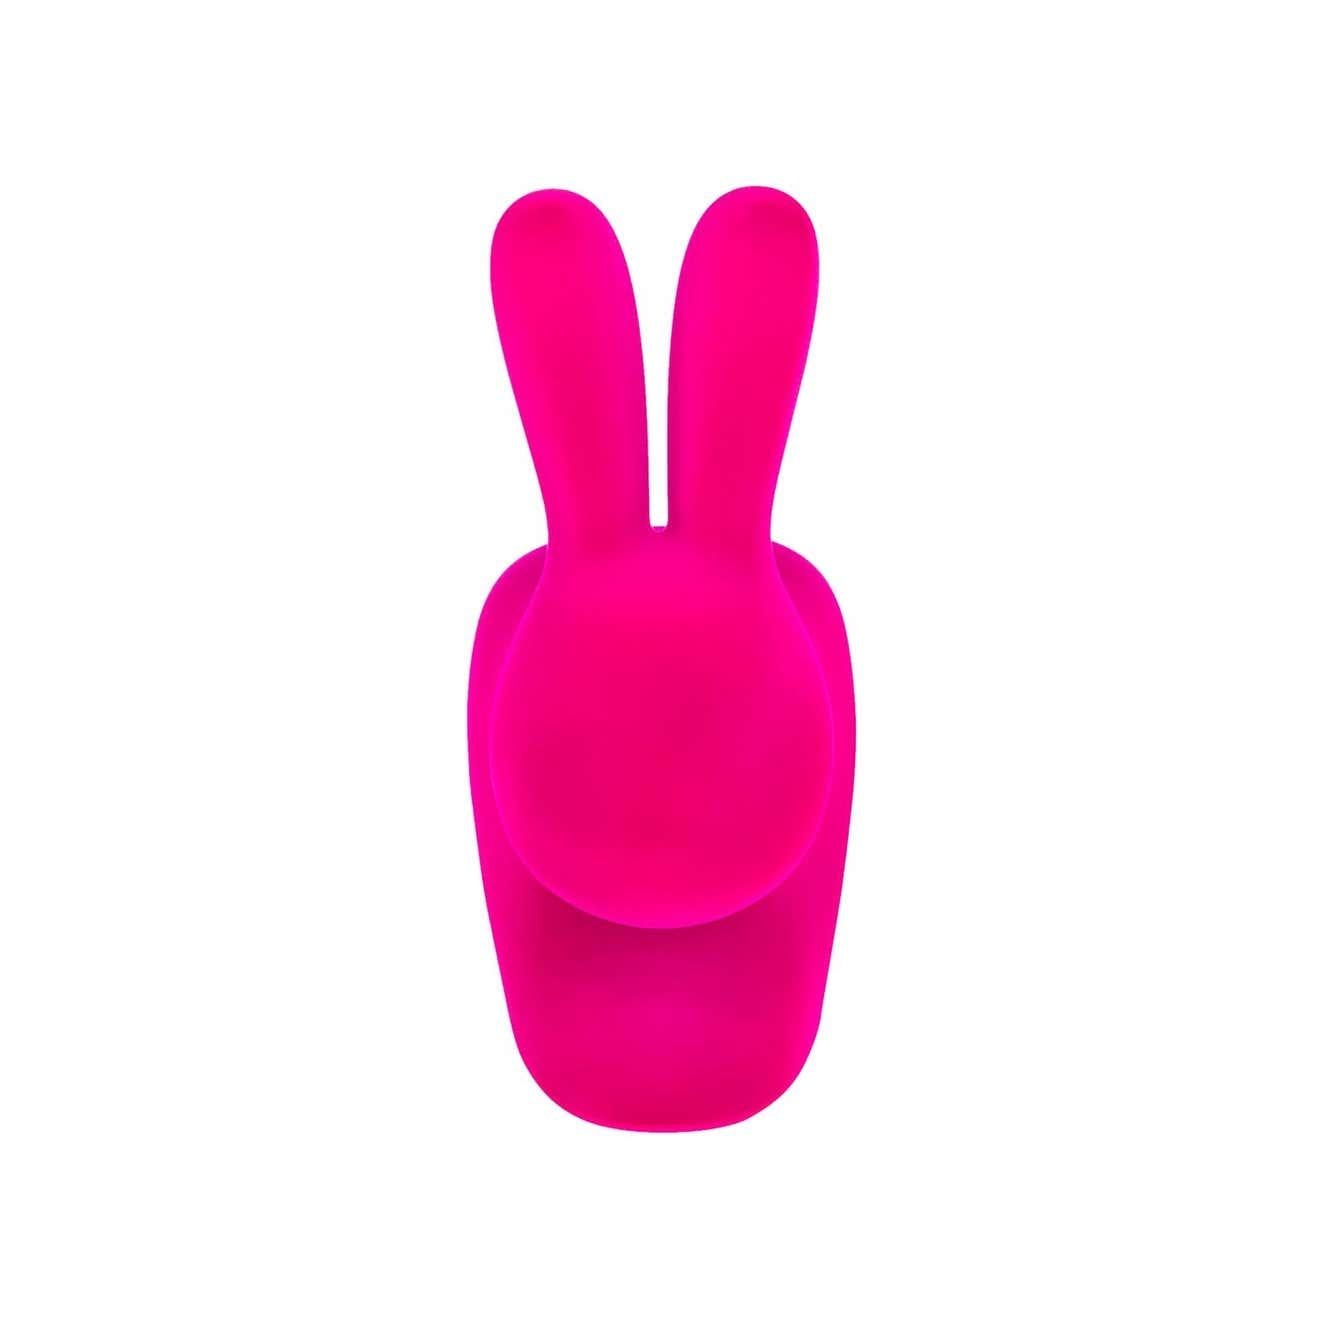 In Stock in Los Angeles

The idea of the rabbit, a gentle, lovable and shy animal, comes from the association of its silhouette with that of a seat, where the rabbit's ears become the backrest of the chair. It is conceived for children's fun: the